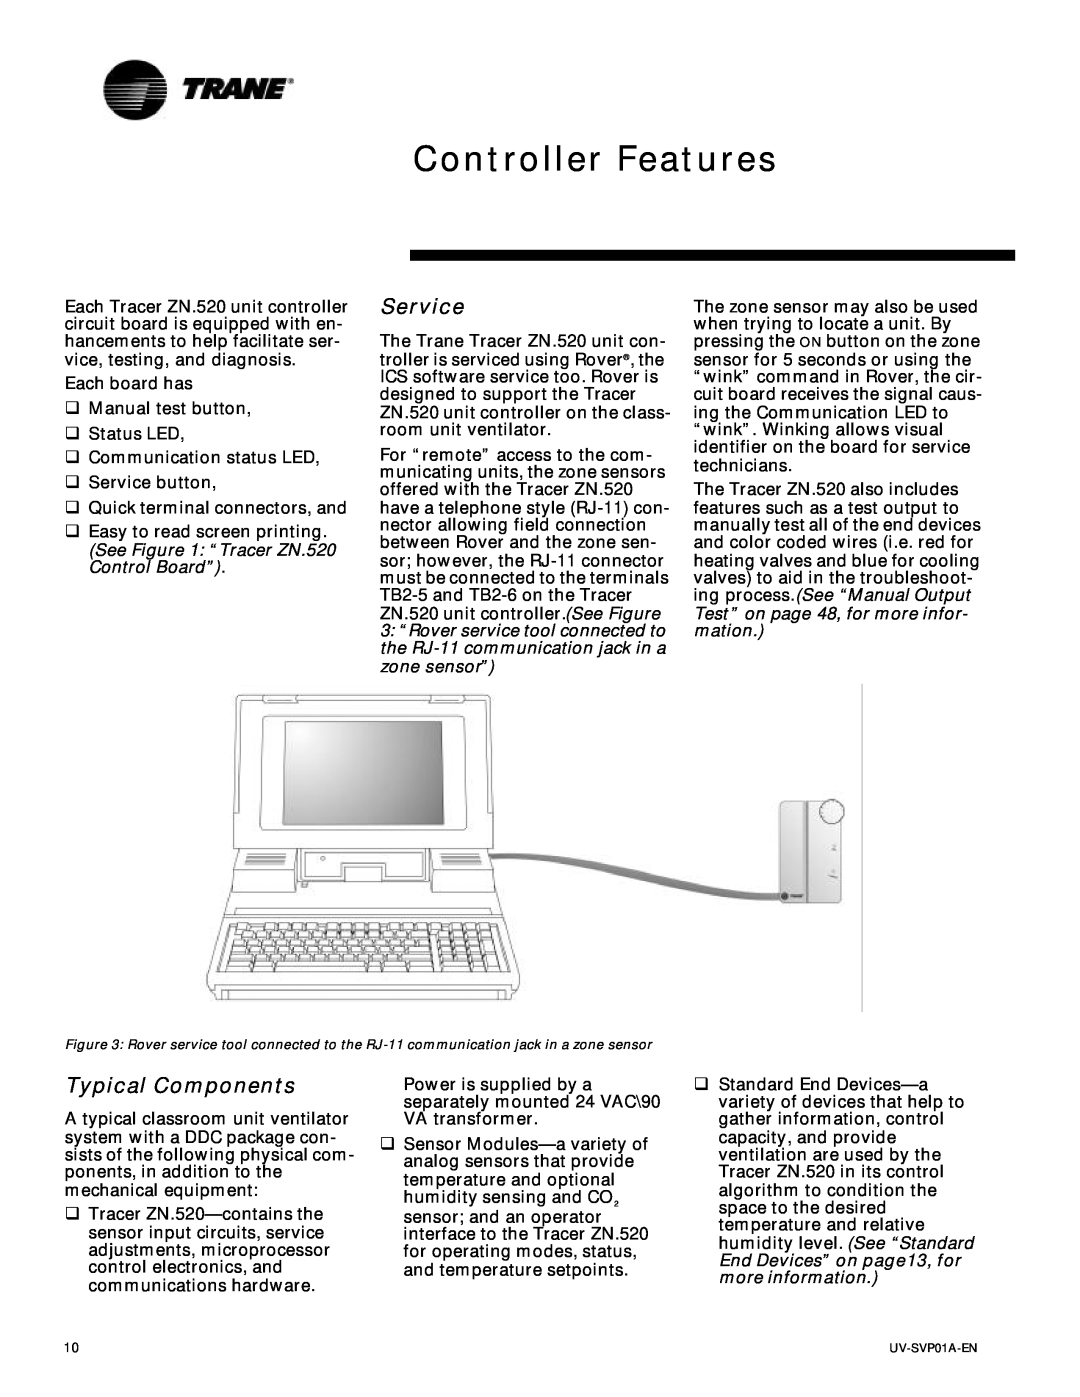 Trane Tracer Unit Ventilator Controller Features, Service, Typical Components, Test” on page 48, for more infor- mation 